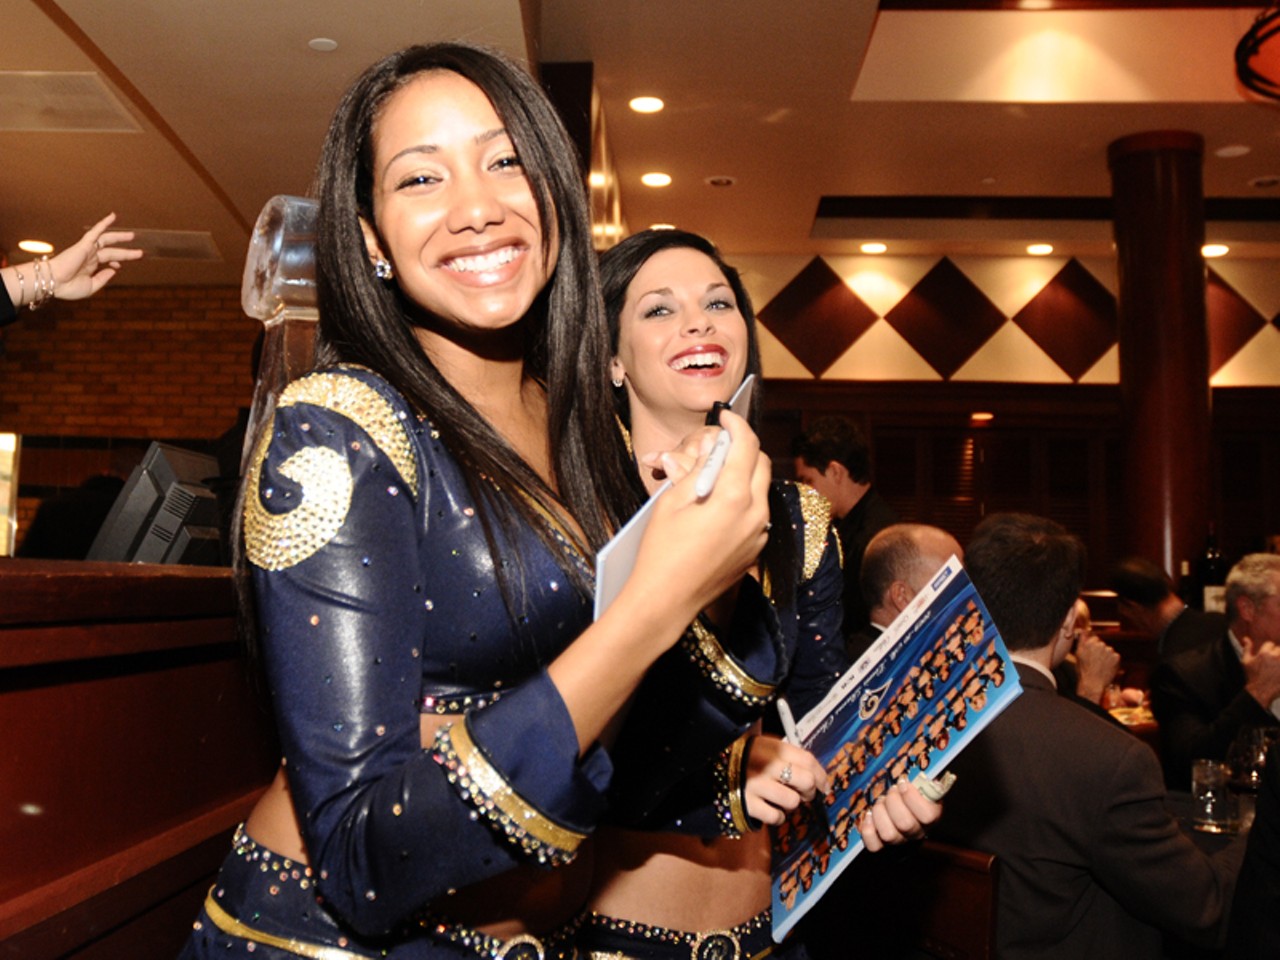 The life of a Rams cheerleader isn't all sequined outfits and Sharpie markers, there's also a lot of smiling involved.